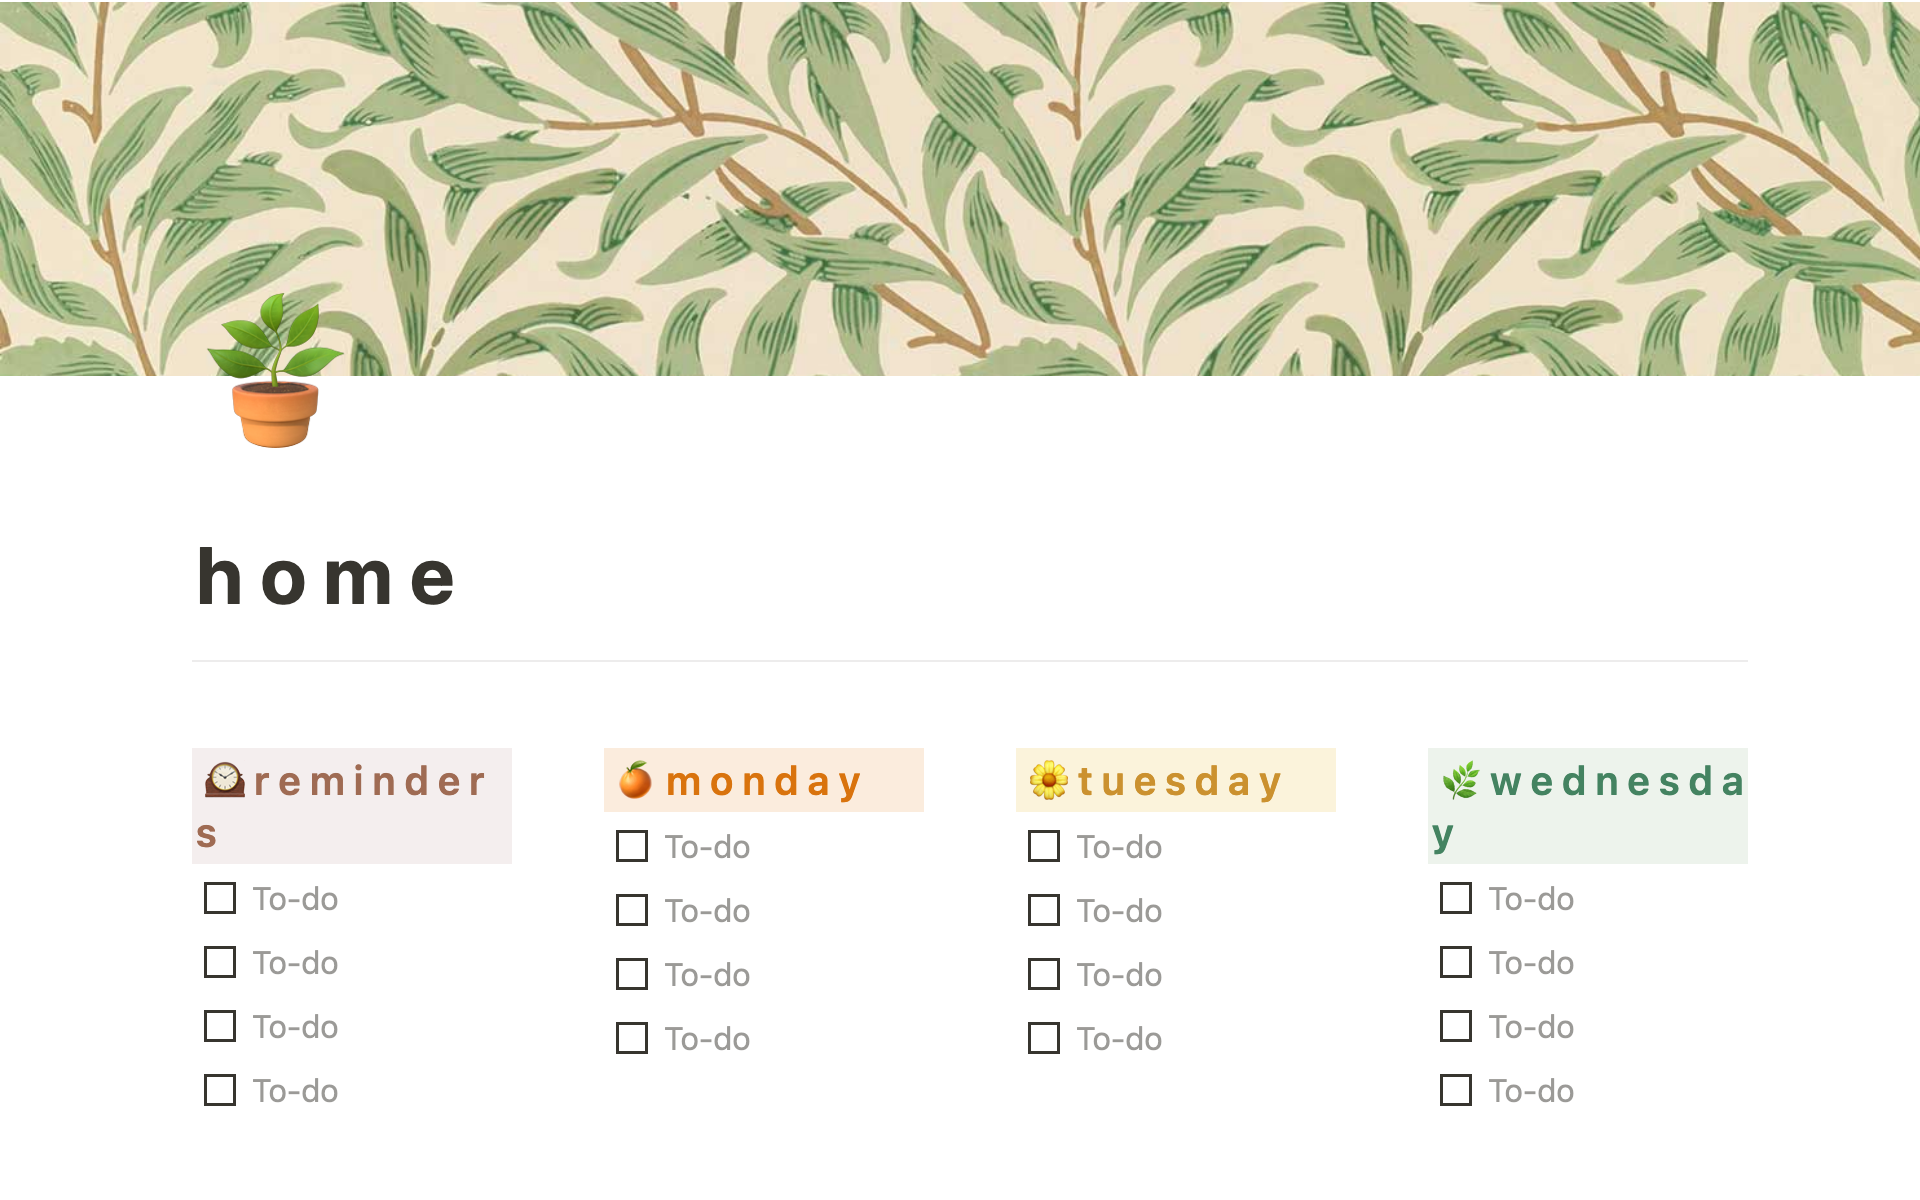 A simple dashboard to help manage your tasks, plan your schedule, and organize your life.